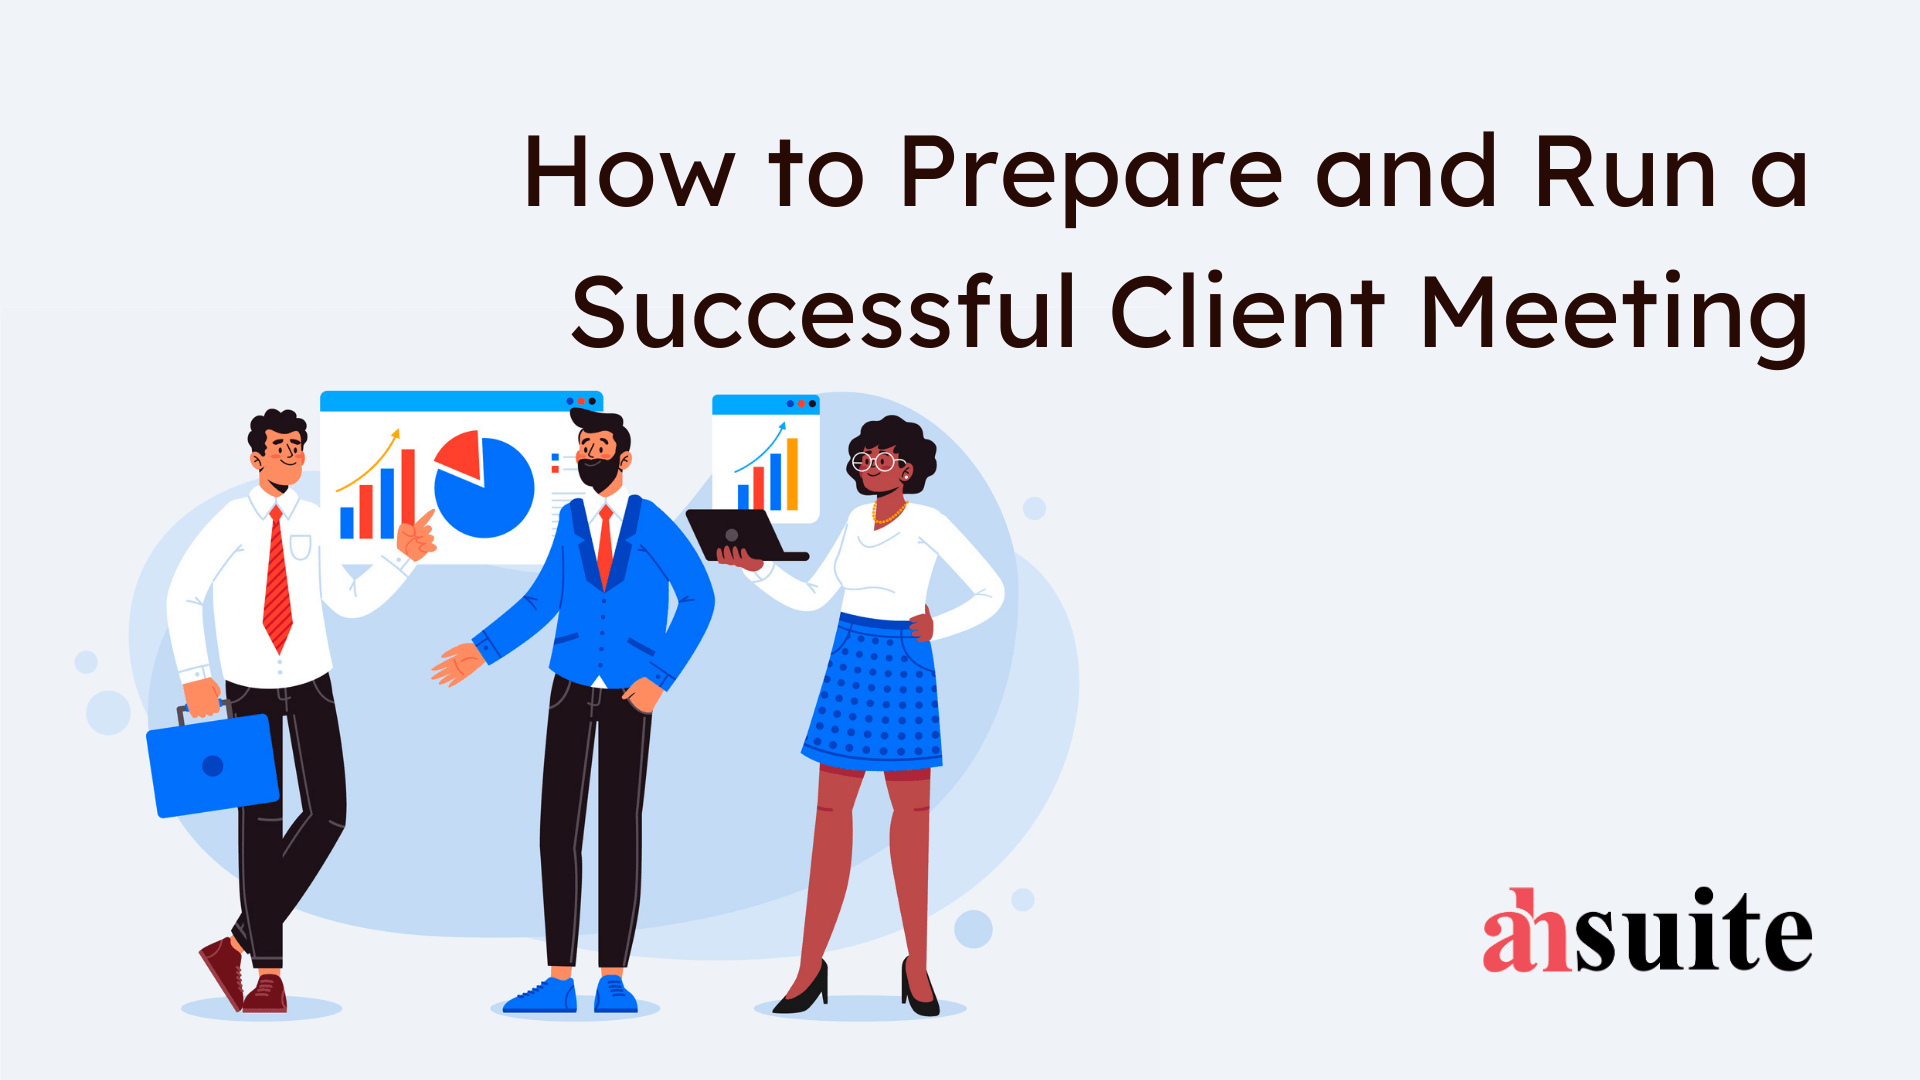 How to Prepare and Run a Successful Client Meeting